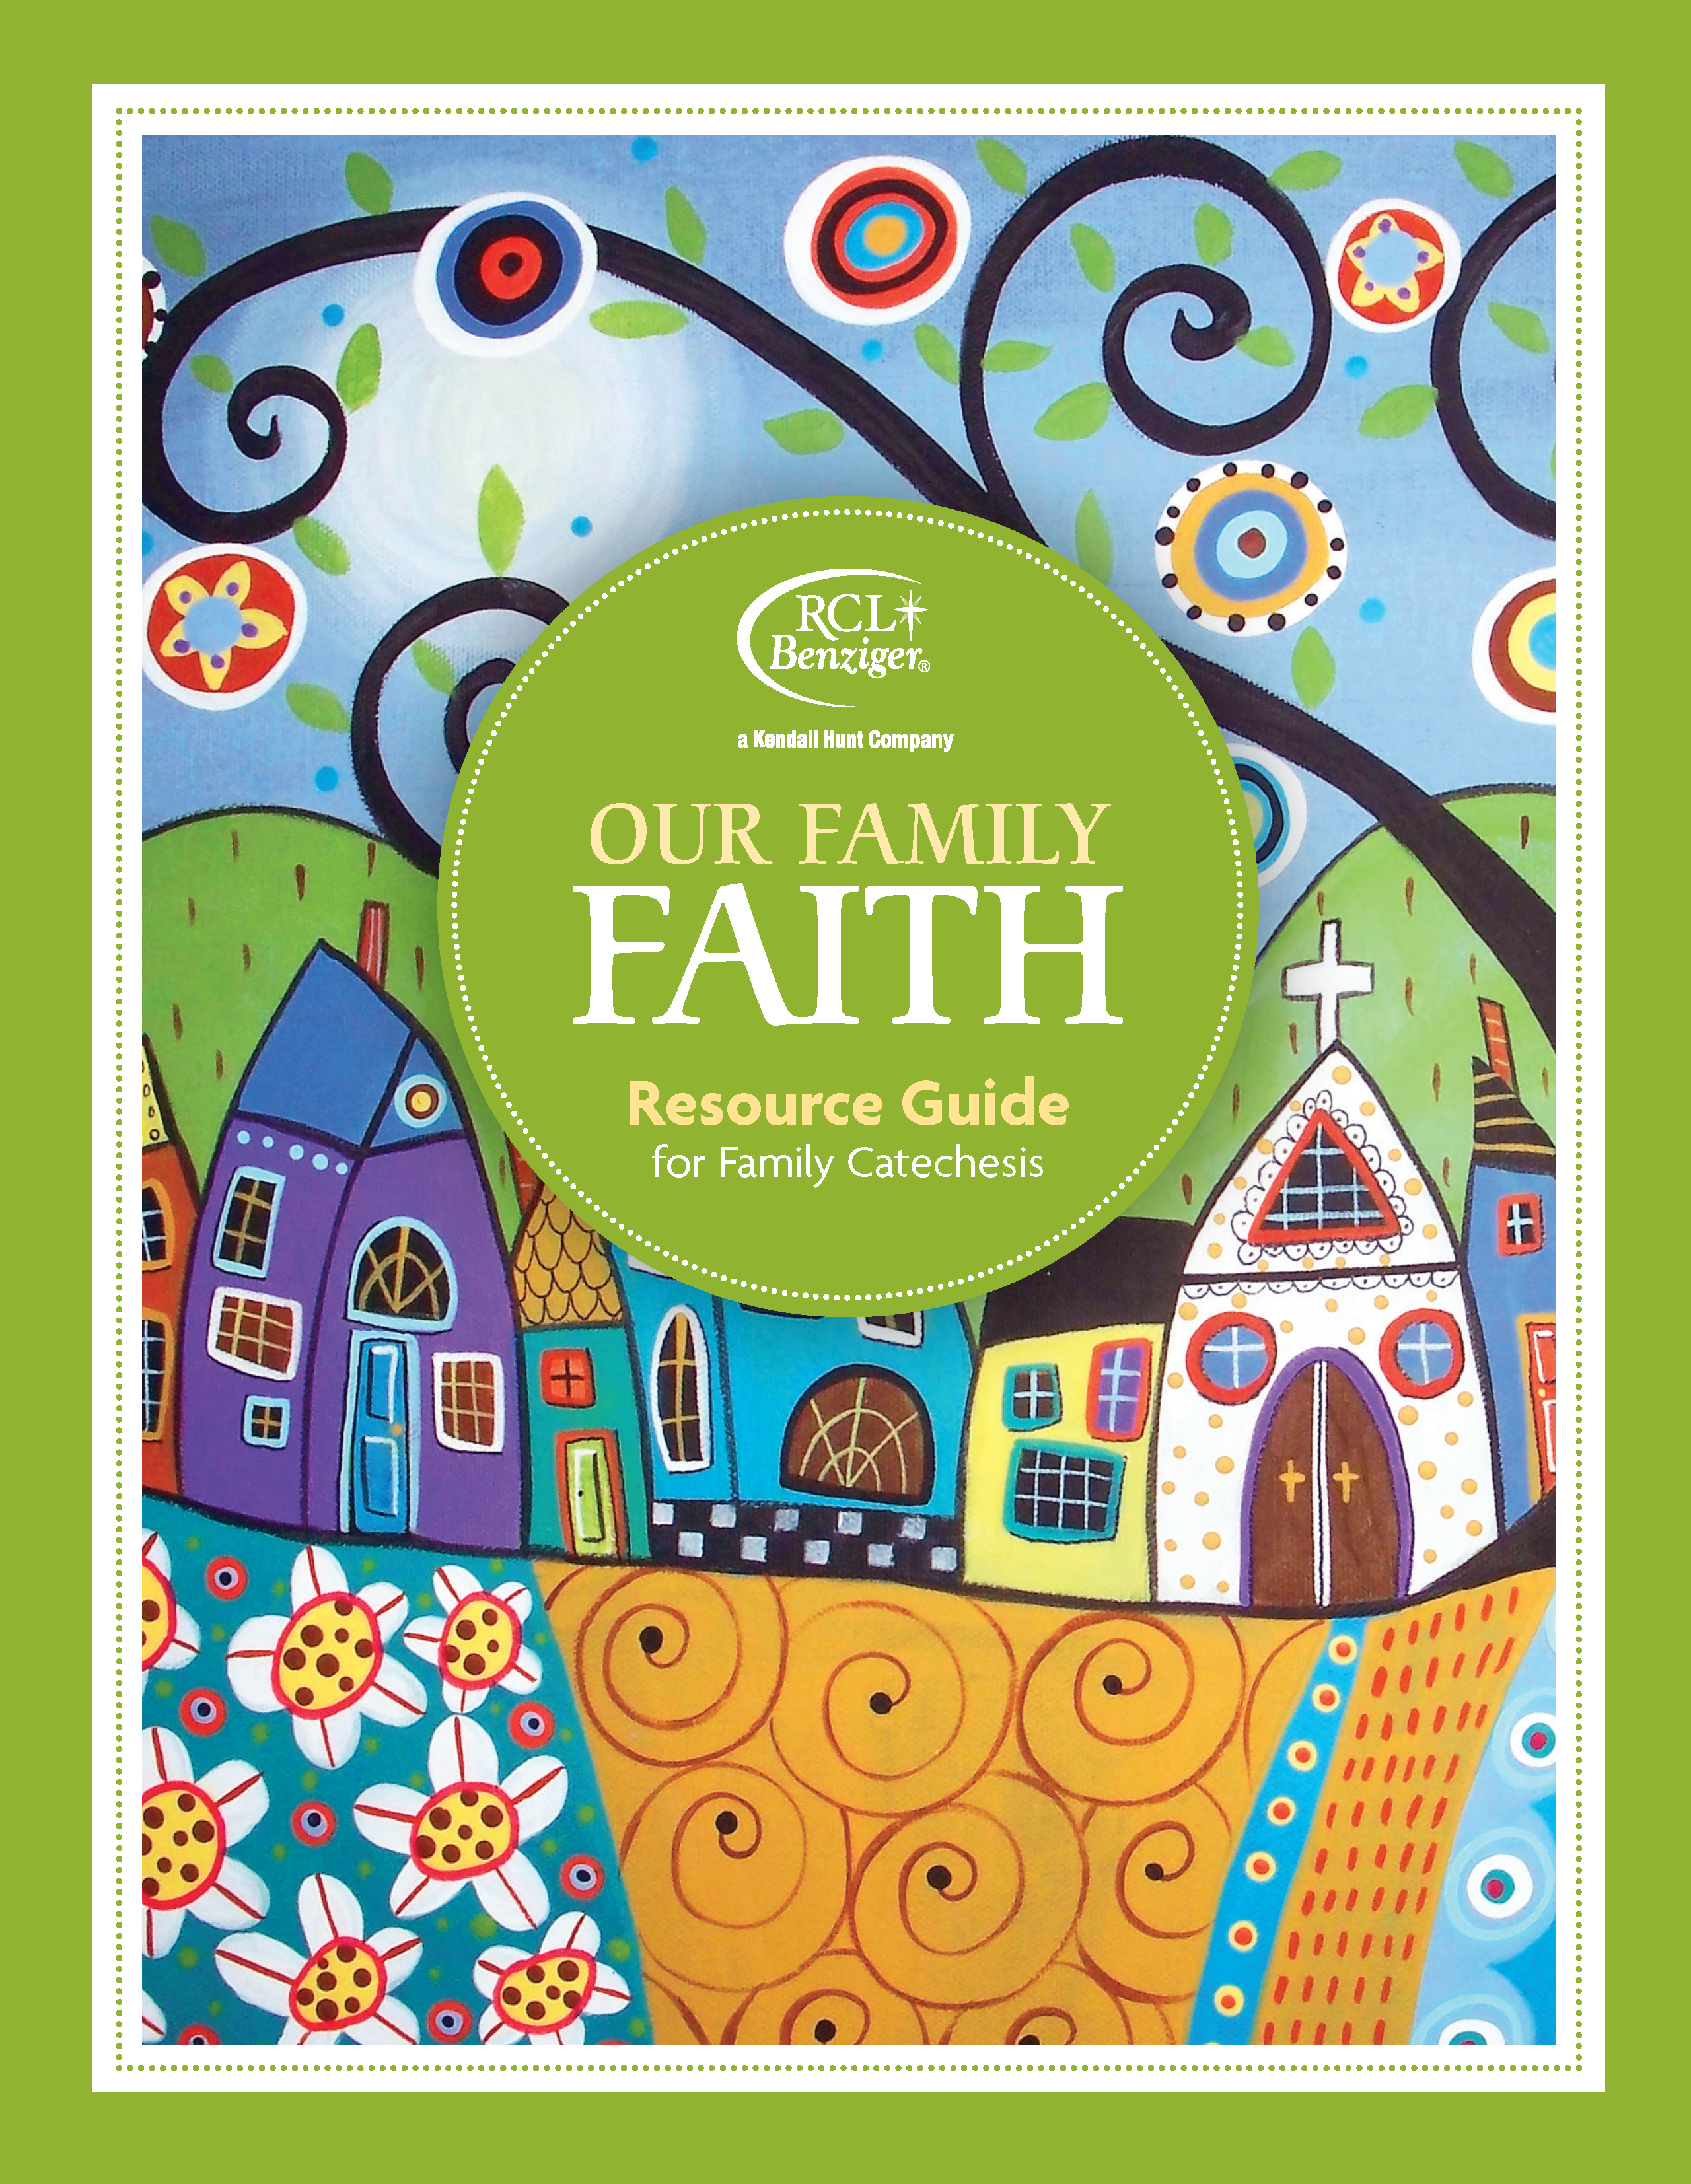 OurFamilyFaith_ResourceGuideForFamilyCatechsis_COVER_2.png